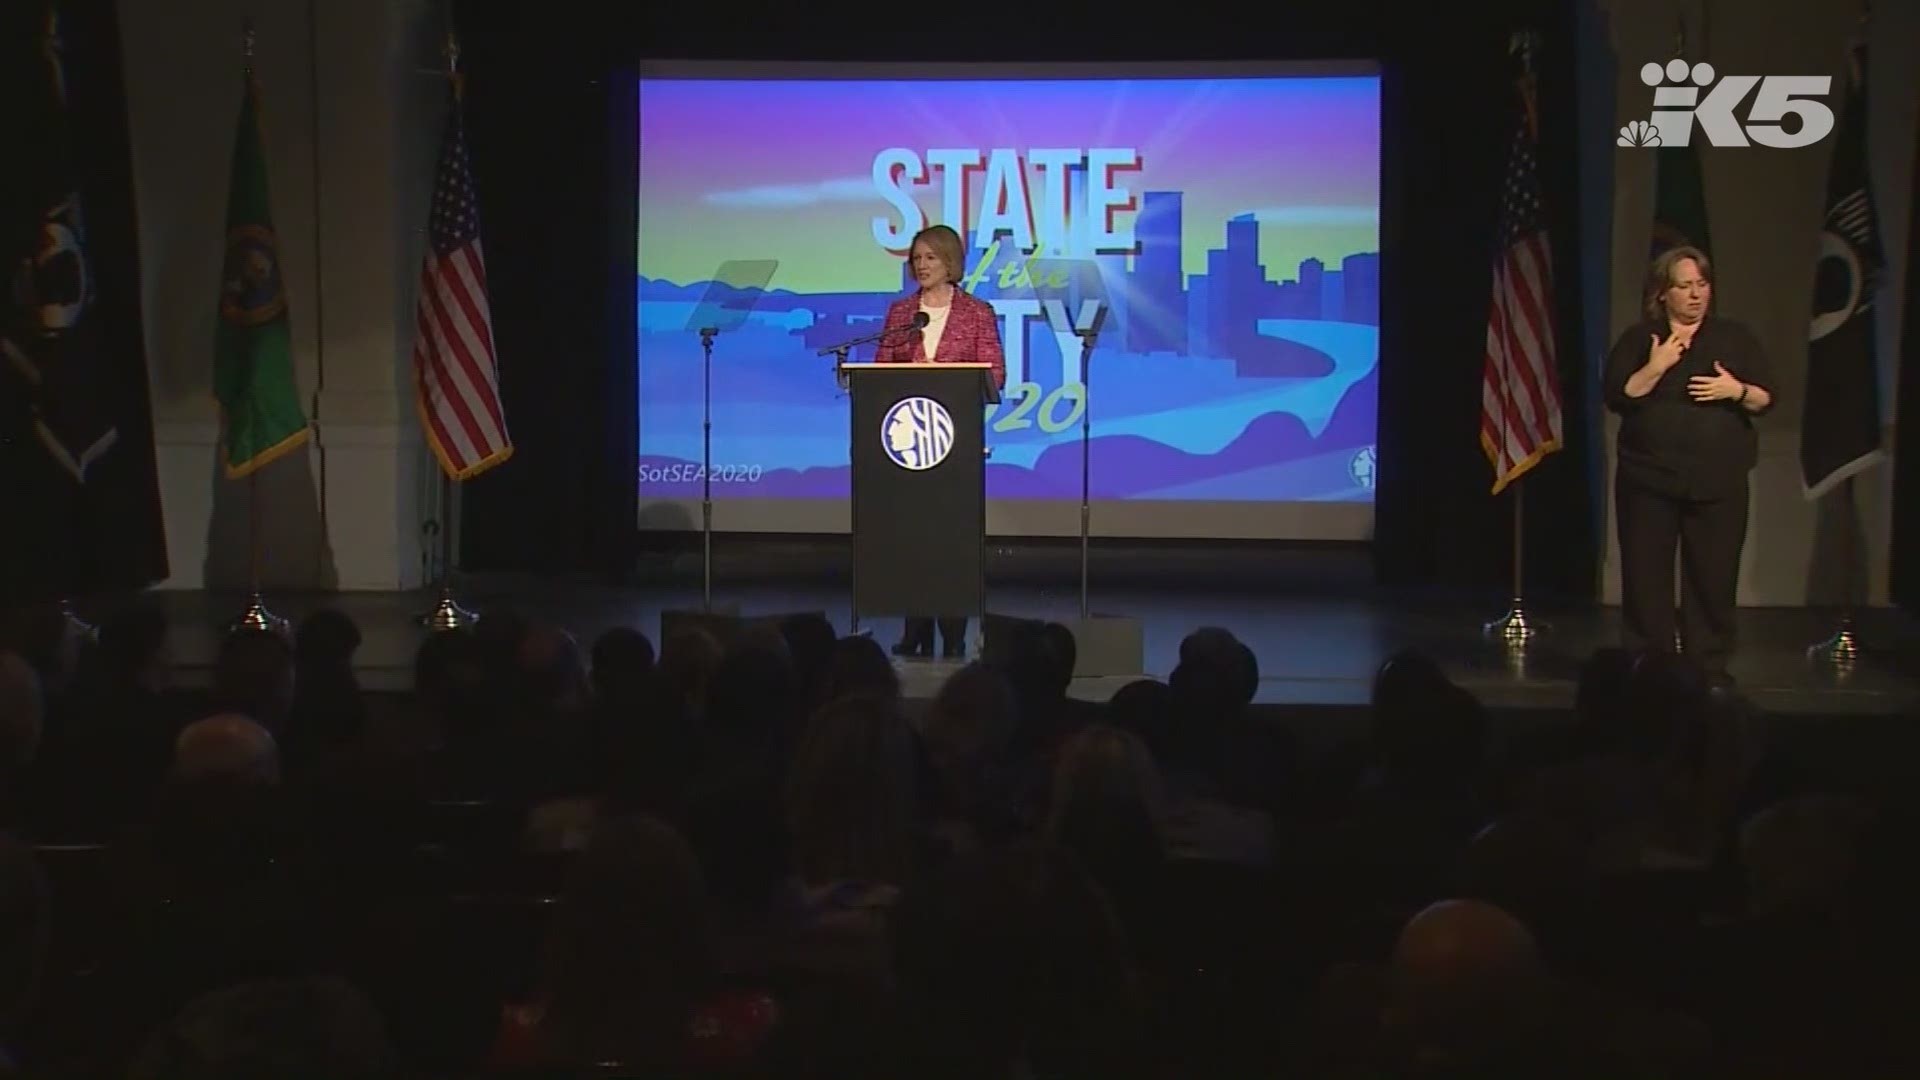 Mayor Jenny Durkan shares what accomplishments have been made over the past two years and her vision for the future during her State of the City address.